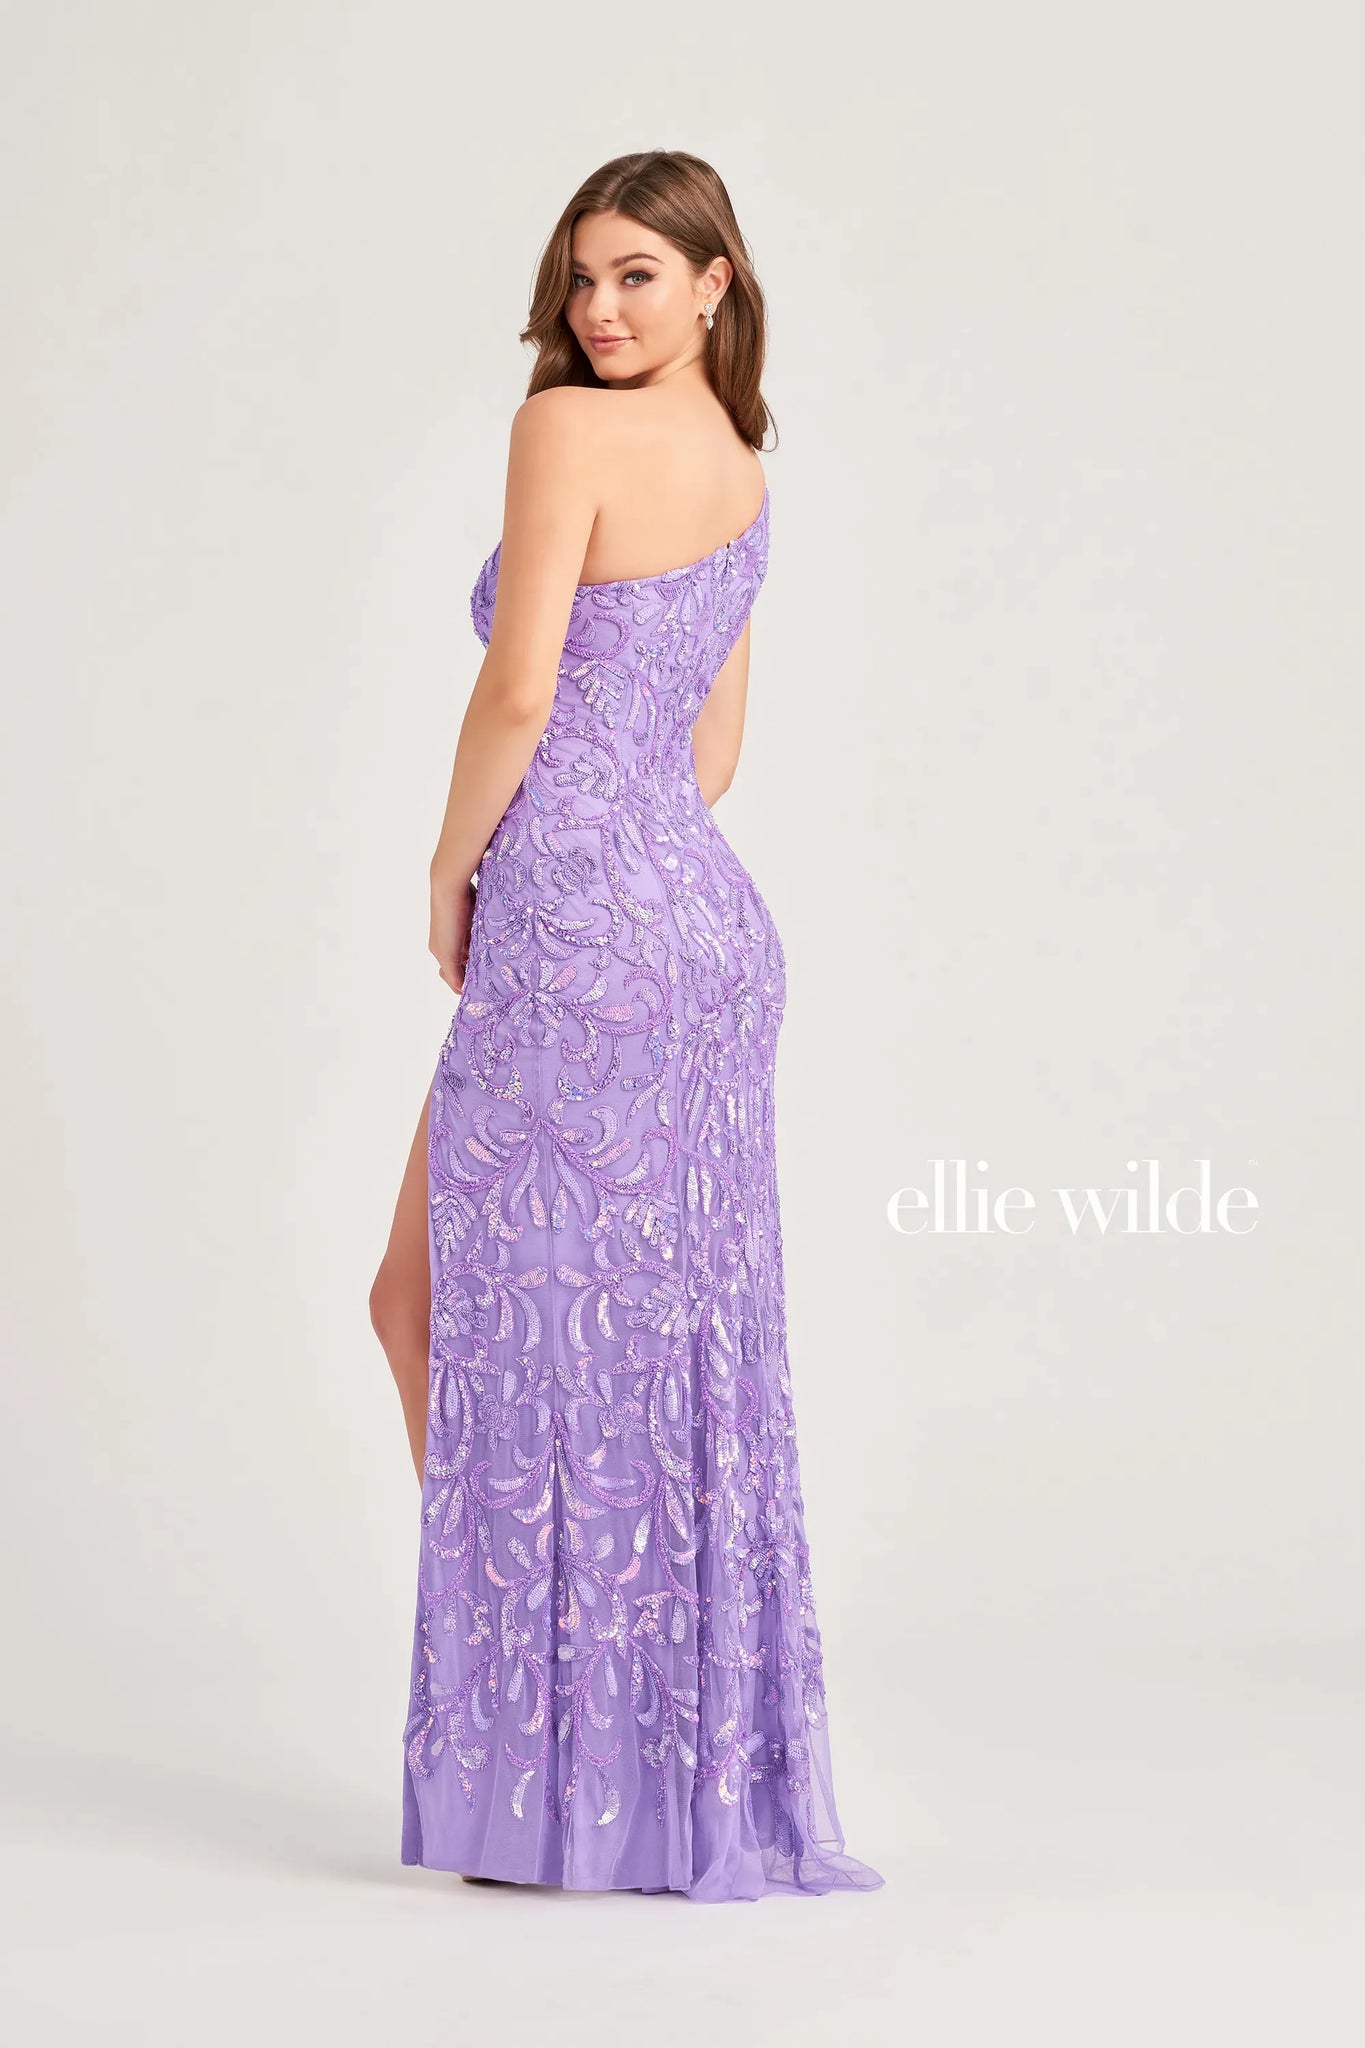 Show up and show off your figure in this stunning Ellie Wilde style EW35021 for your special event. This fitted silhouette showcases an asymmetrical neckline with a single shoulder strap. Dazzling patterns of intricate beadwork are embellished all over adding the perfect shine ensuring you stand out from every angle.